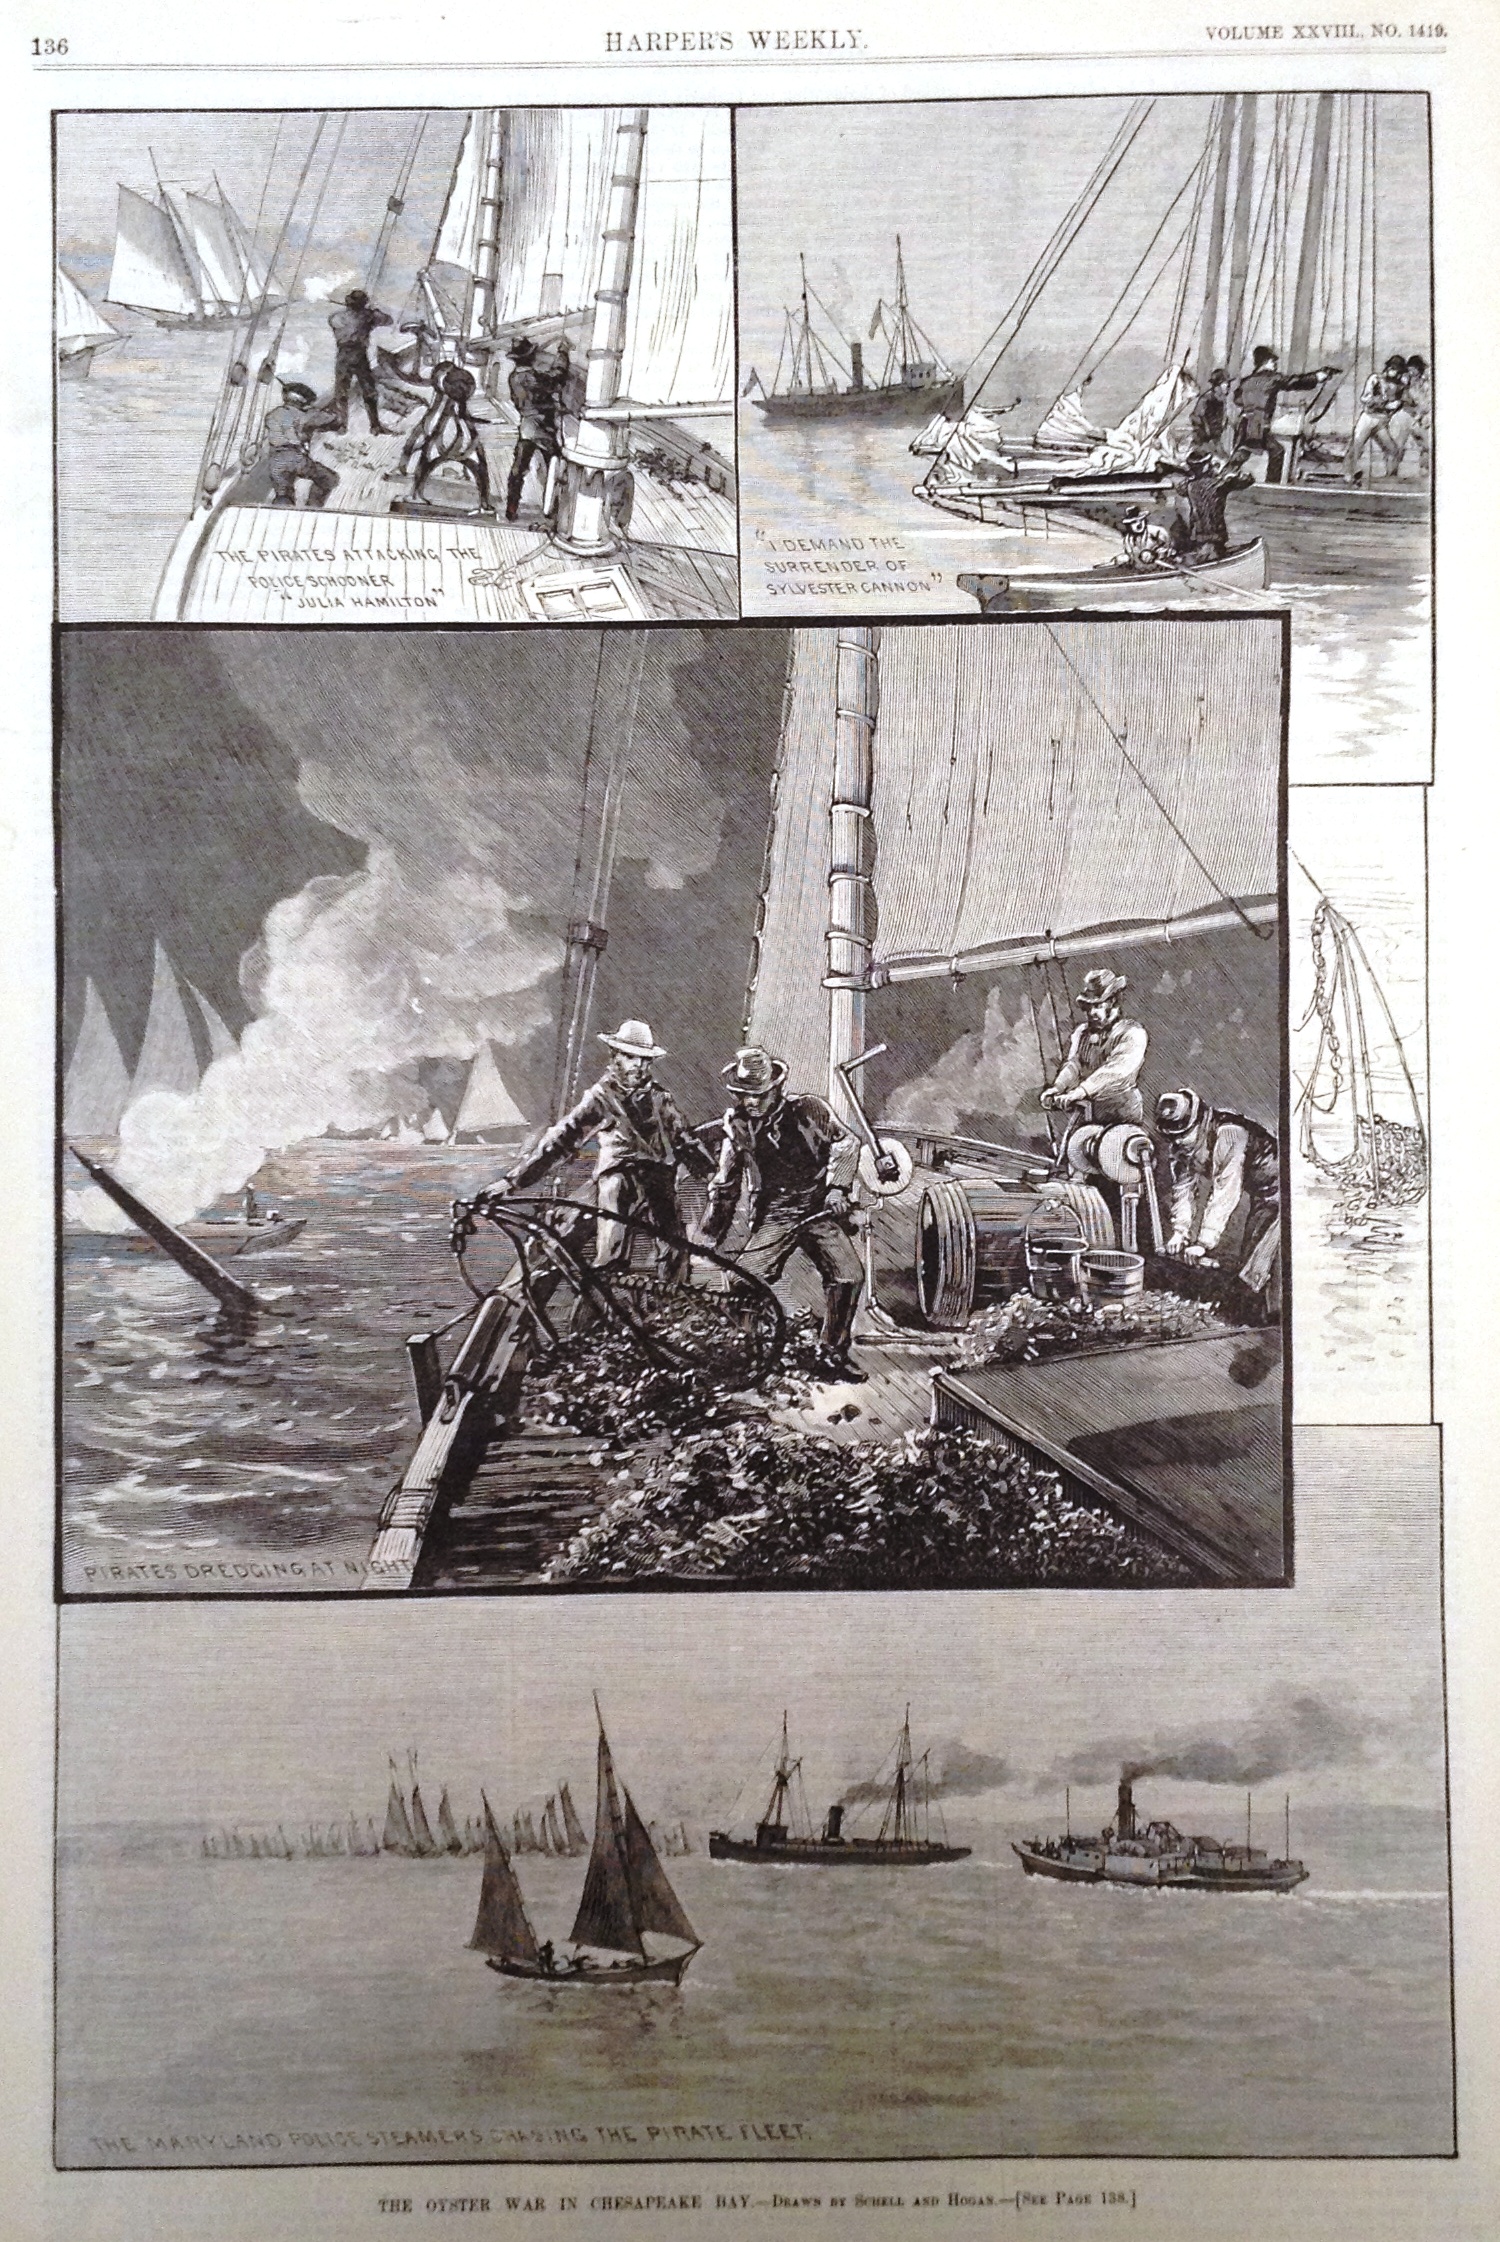 Depiction of the Oyster Wars in Harper's Weekly. The Oyster War in Chesapeake Bay: The Pirates Attacking the Police Schooner "Julia Hamilton," "I demand the surrender of Sylvester Cannon," Pirates Dredging at Night, The Maryland Police Steamers chasing the Pirate Fleet, 1880, Medium Print Collection, MdHS.